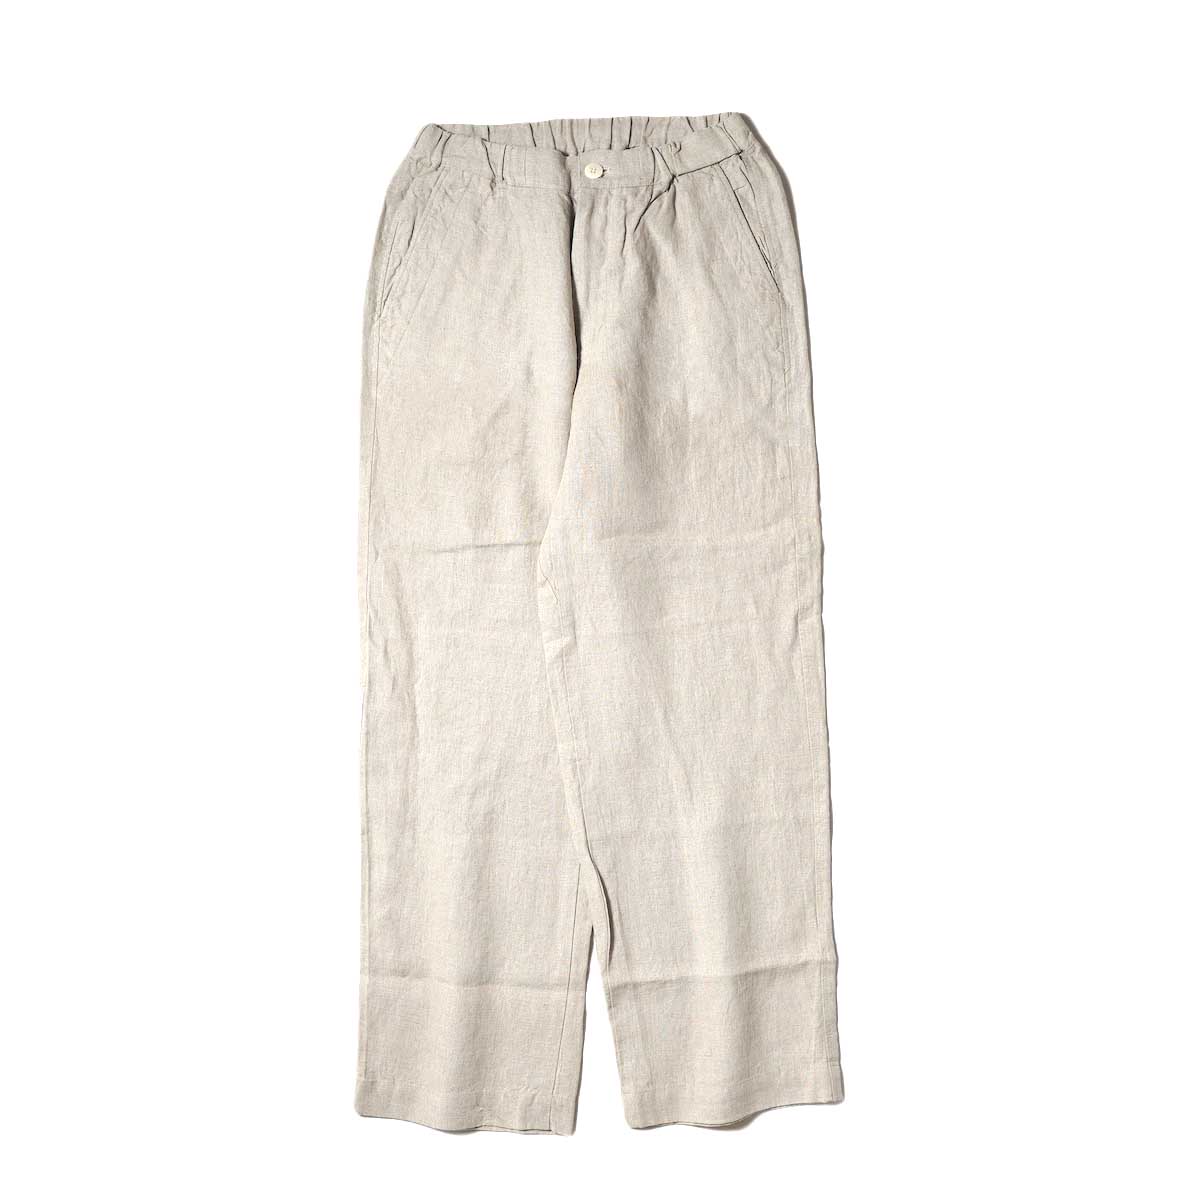 BRENA / Coq Pants - French Linen Canvas (Natural)